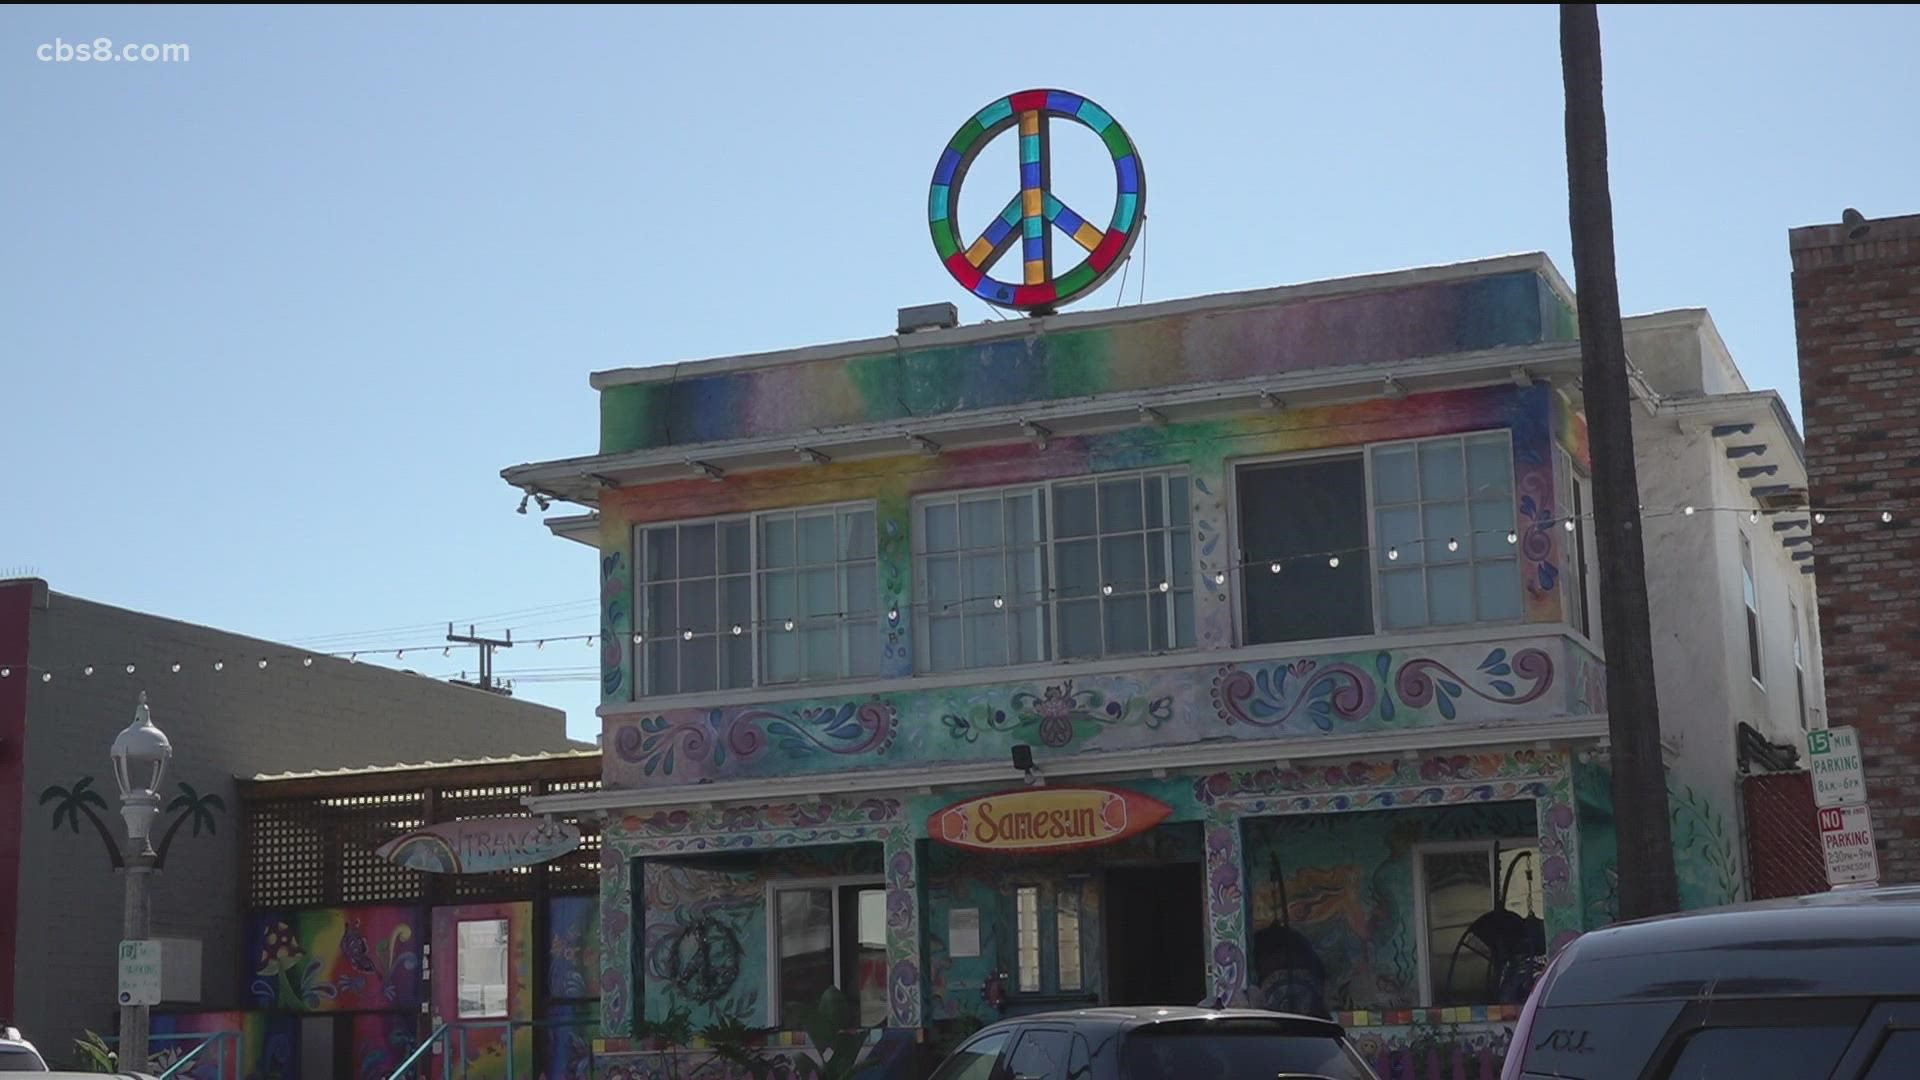 News 8 looks into the history of Ocean Beach, and what it's like today. We revisit Newport Avenue businesses, the pier and the people featured in 1987.